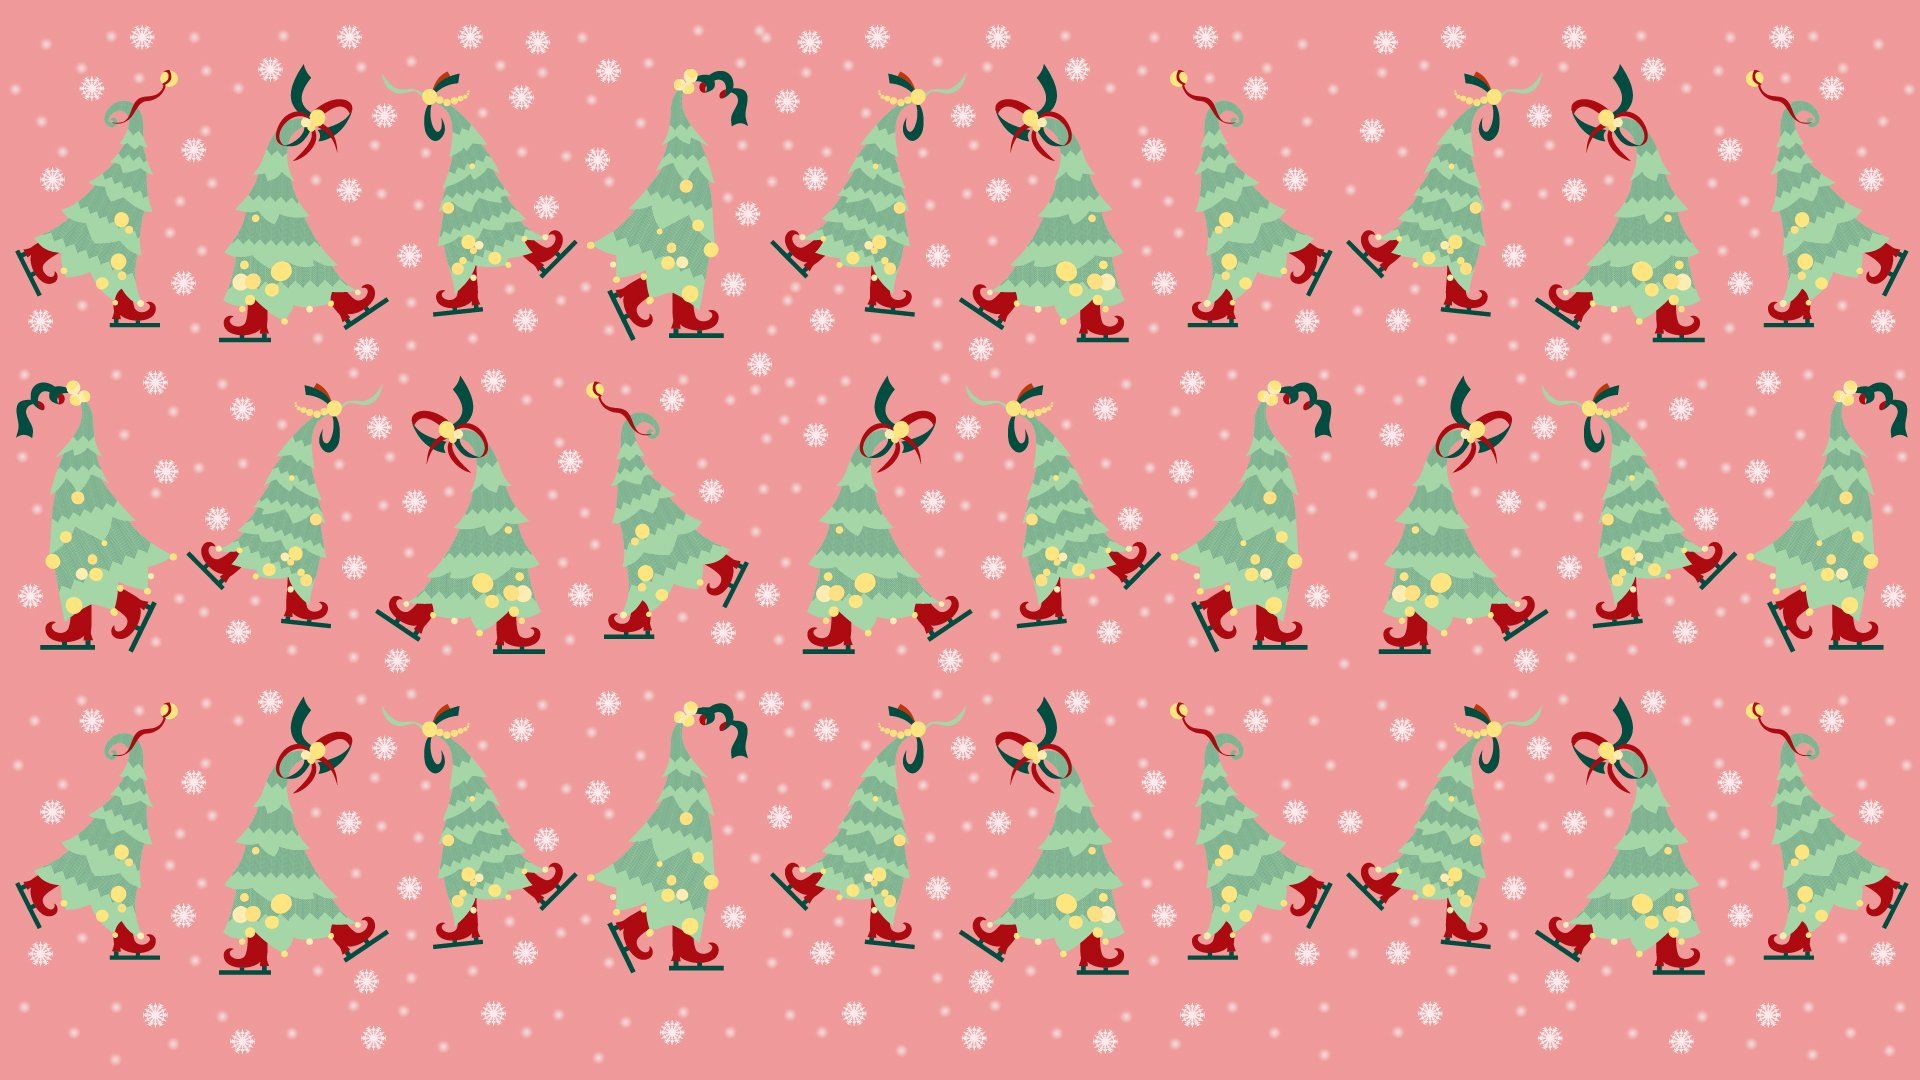 Christmas background wallpapers for friends and family christmasquotes   Merry christmas wallpaper Christmas phone wallpaper Merry christmas  background